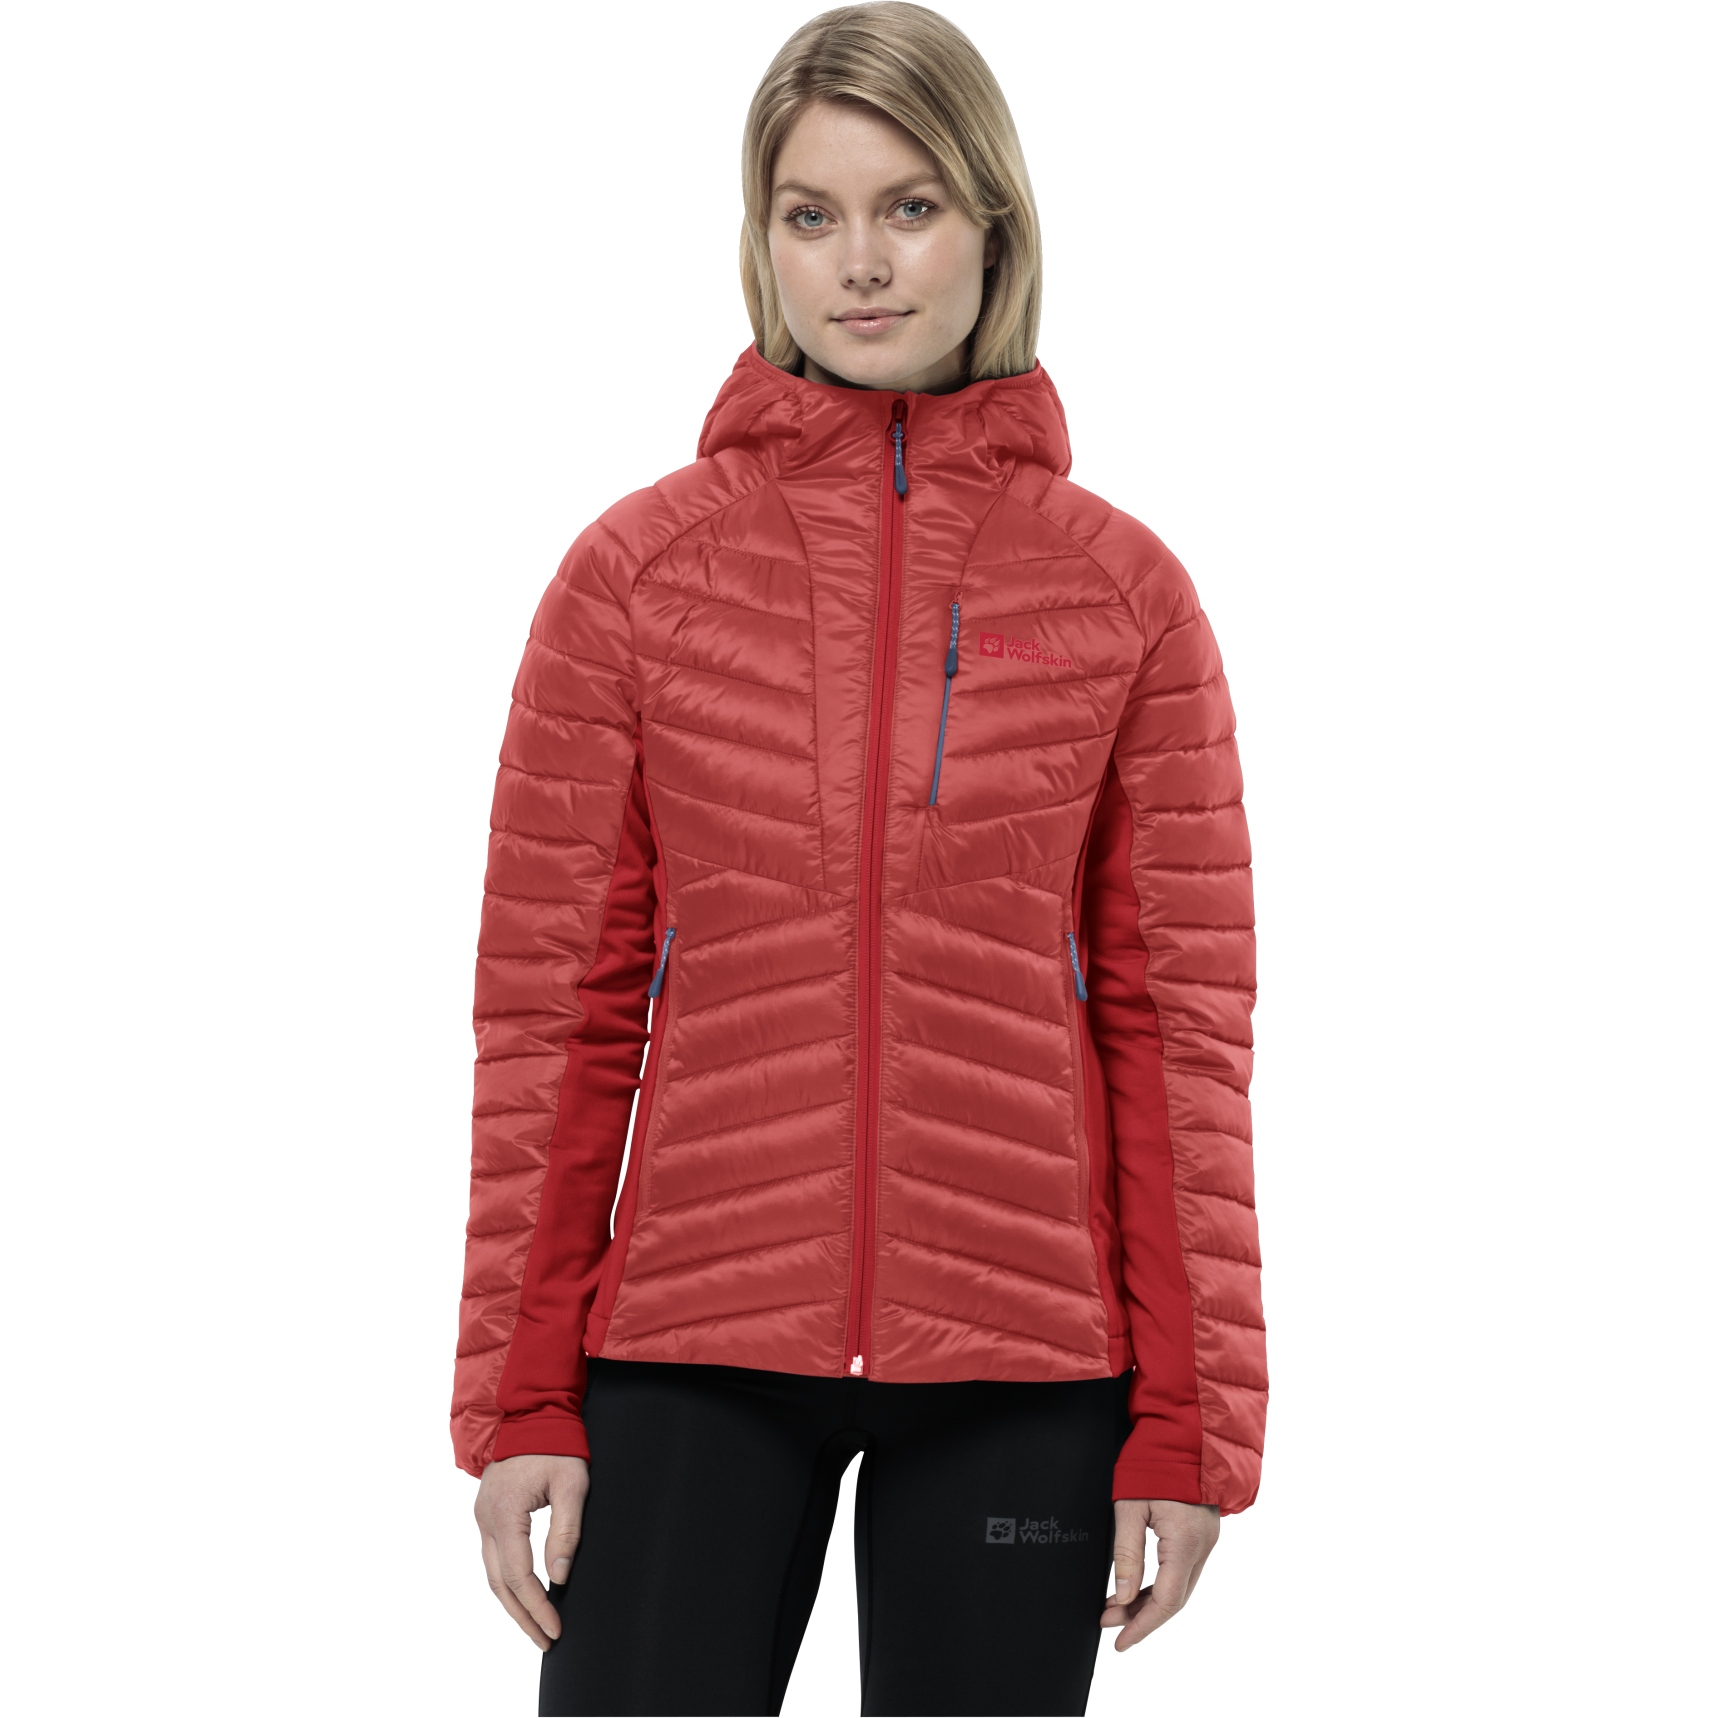 Picture of Jack Wolfskin Routeburn Pro Insulated Jacket Women - vibrant red